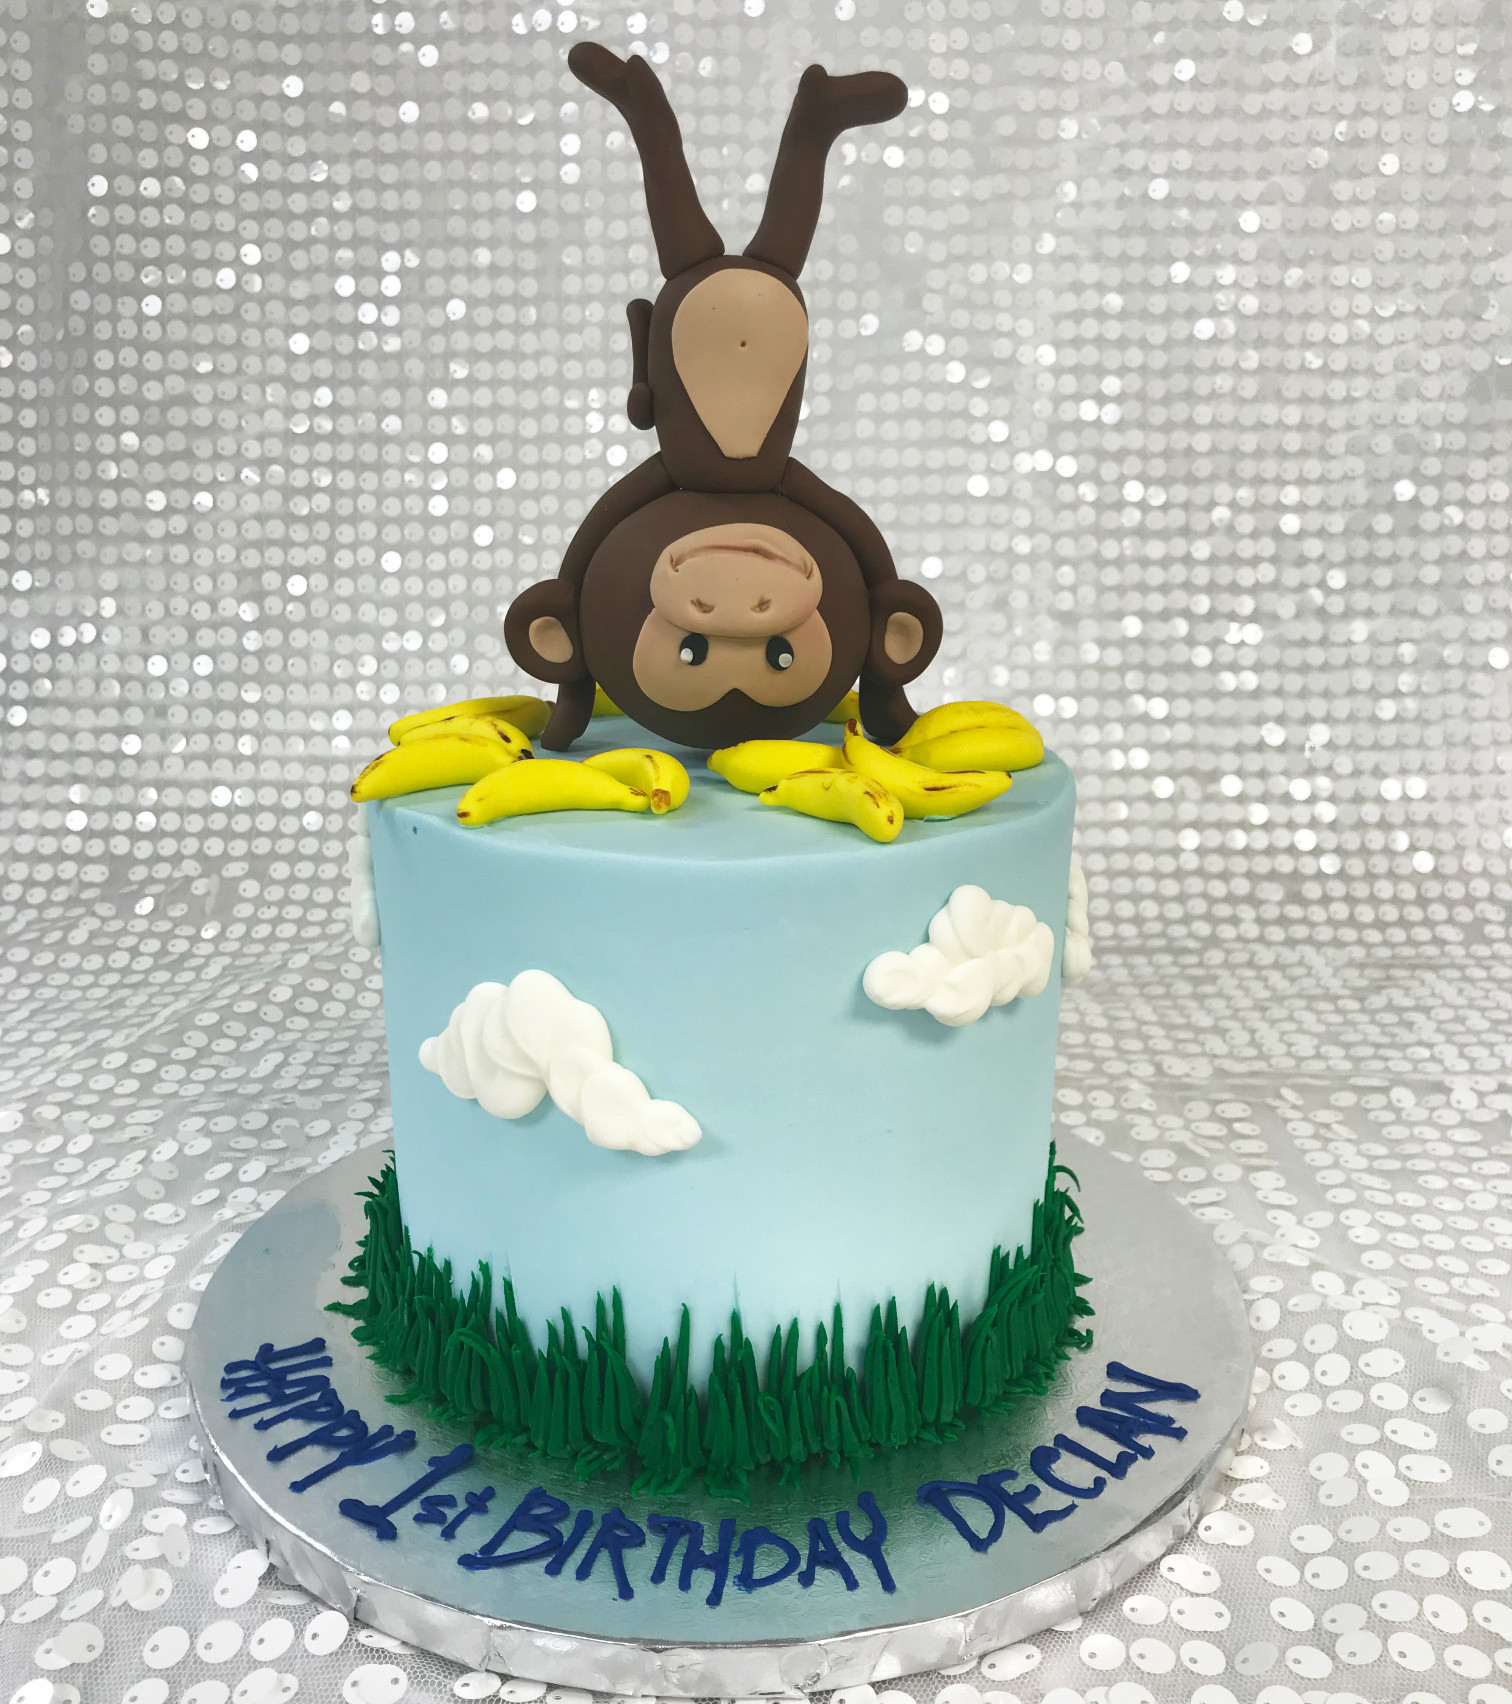 The Best Ideas for Birthday Cake Bakery Near Me - Home, Family, Style